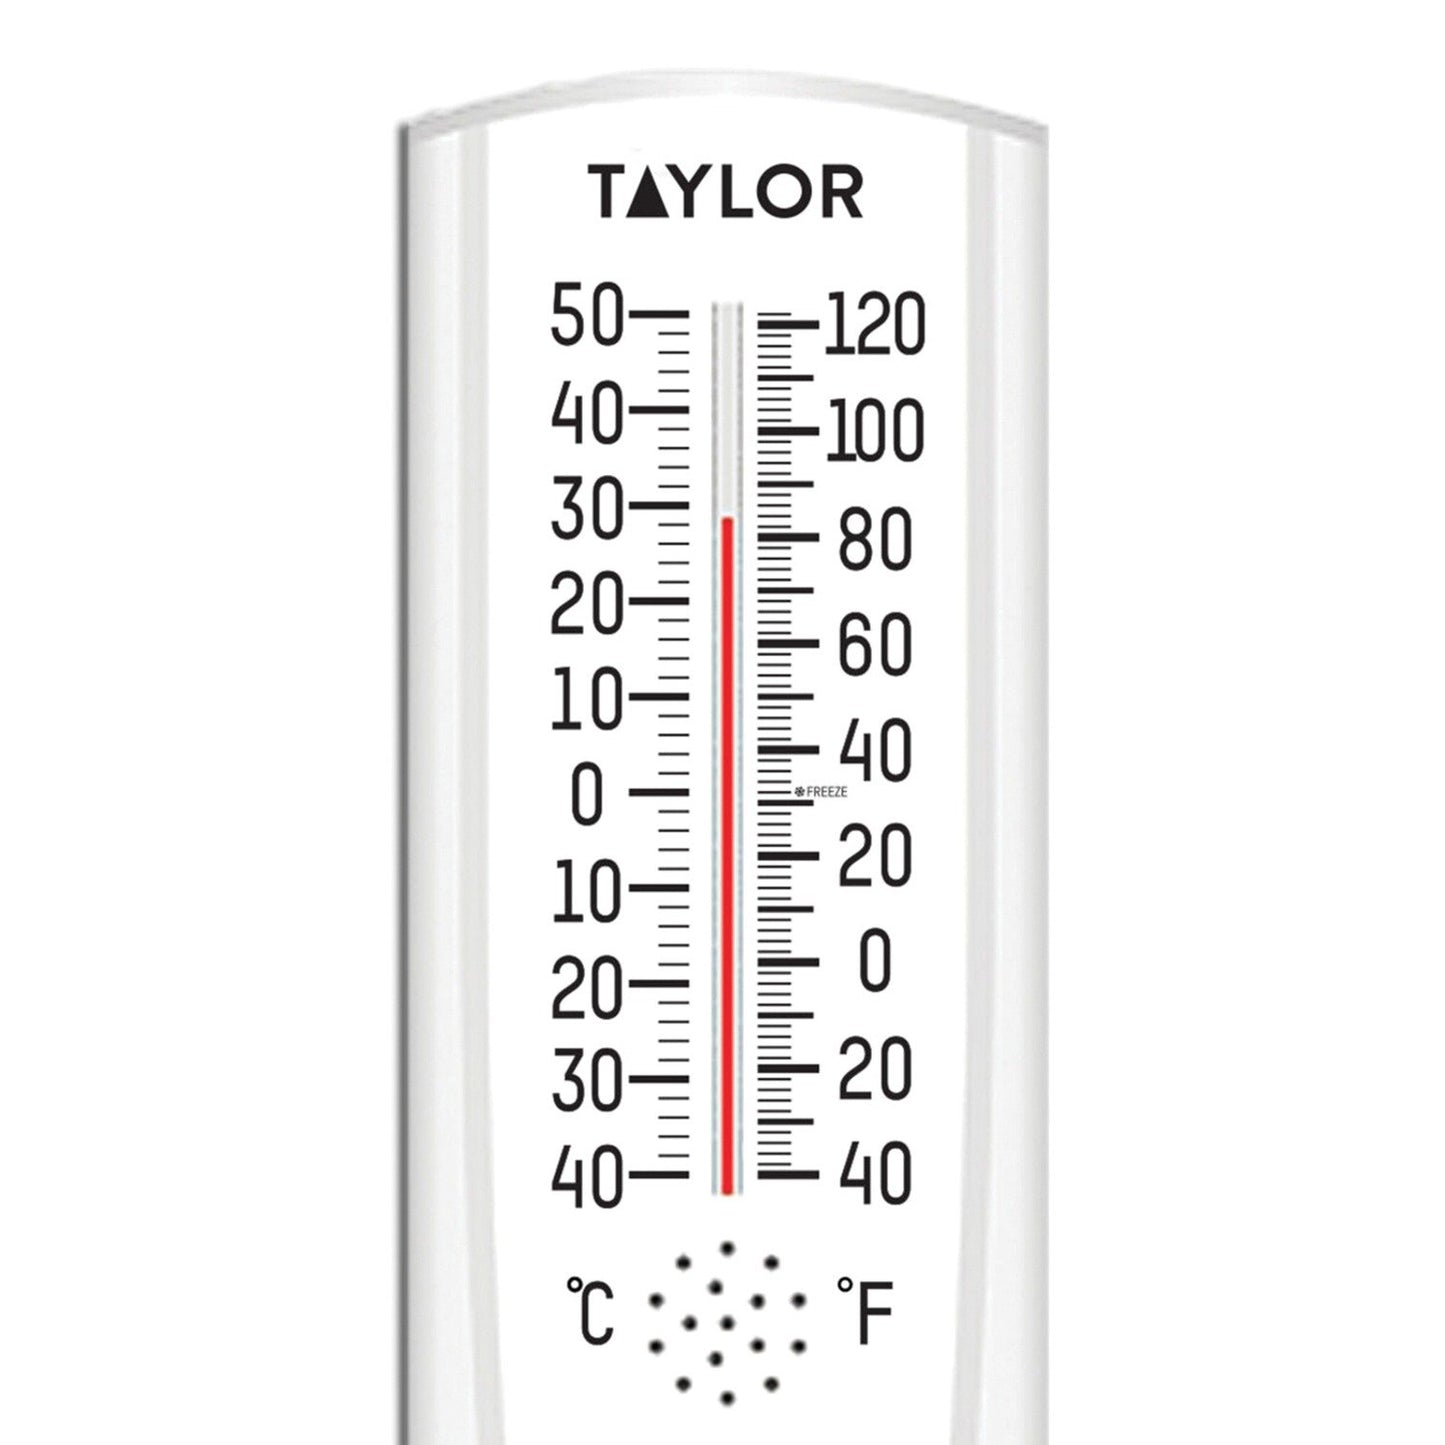 Taylor Precision Products 5537 9-1/8-Inch Tube Thermometer